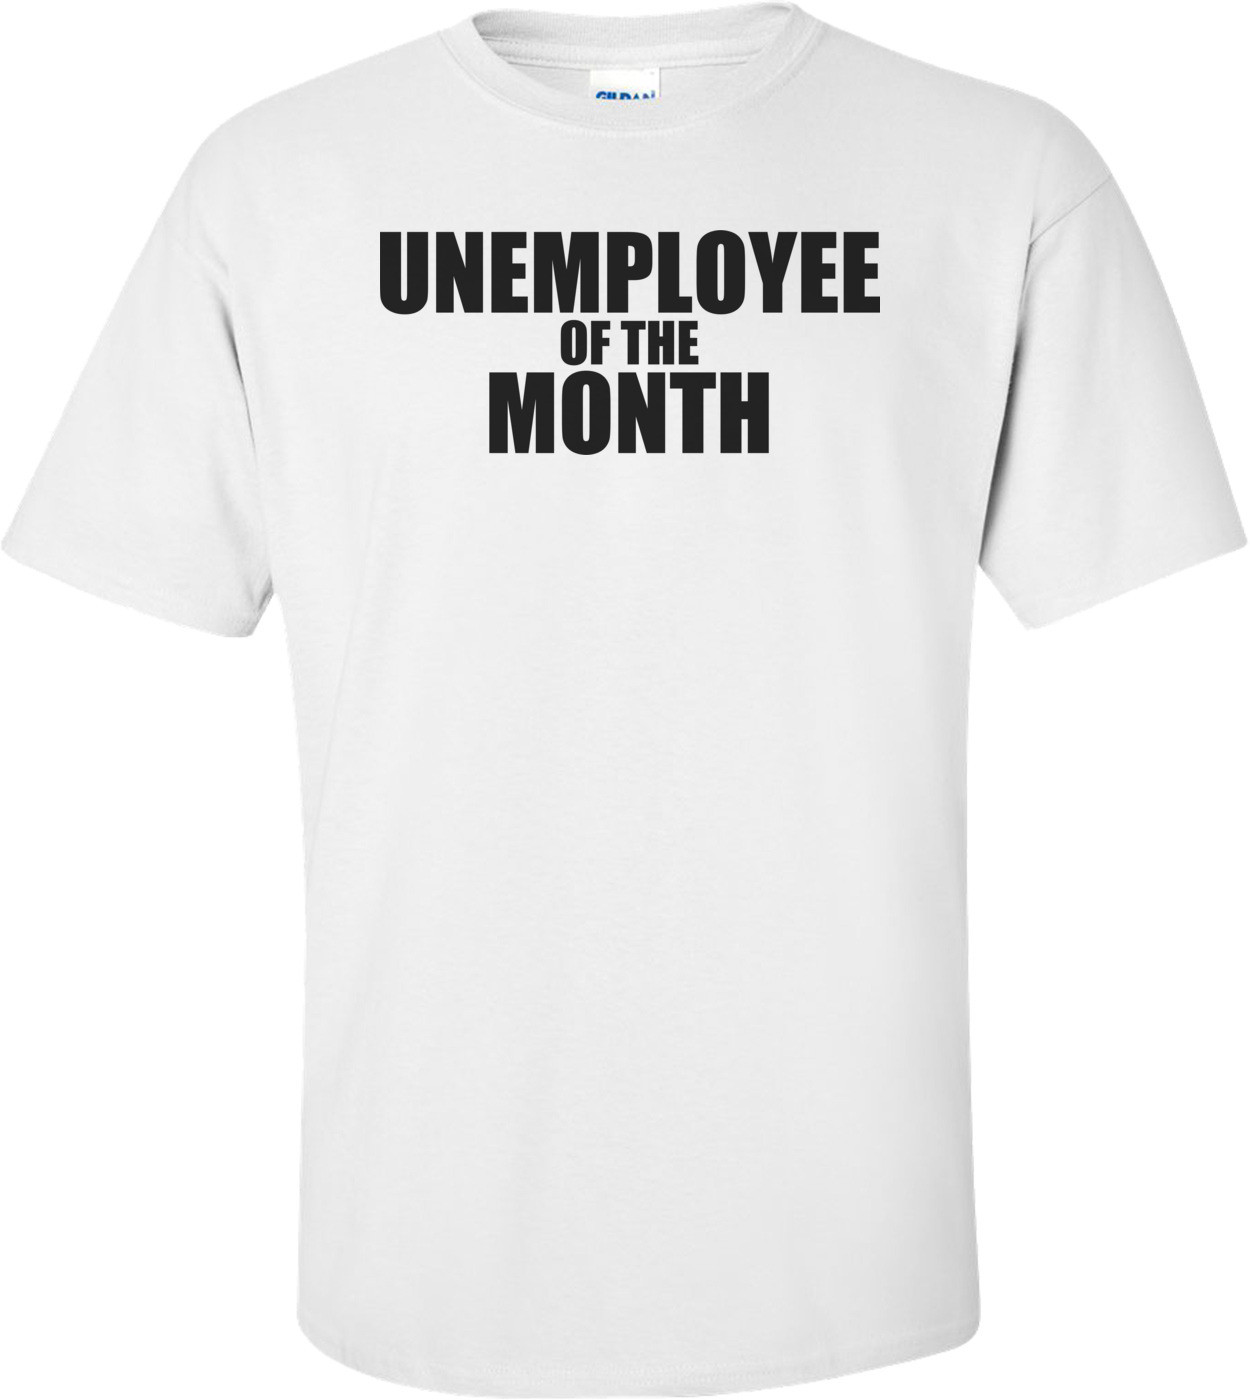 Unemployee Of The Month Funny